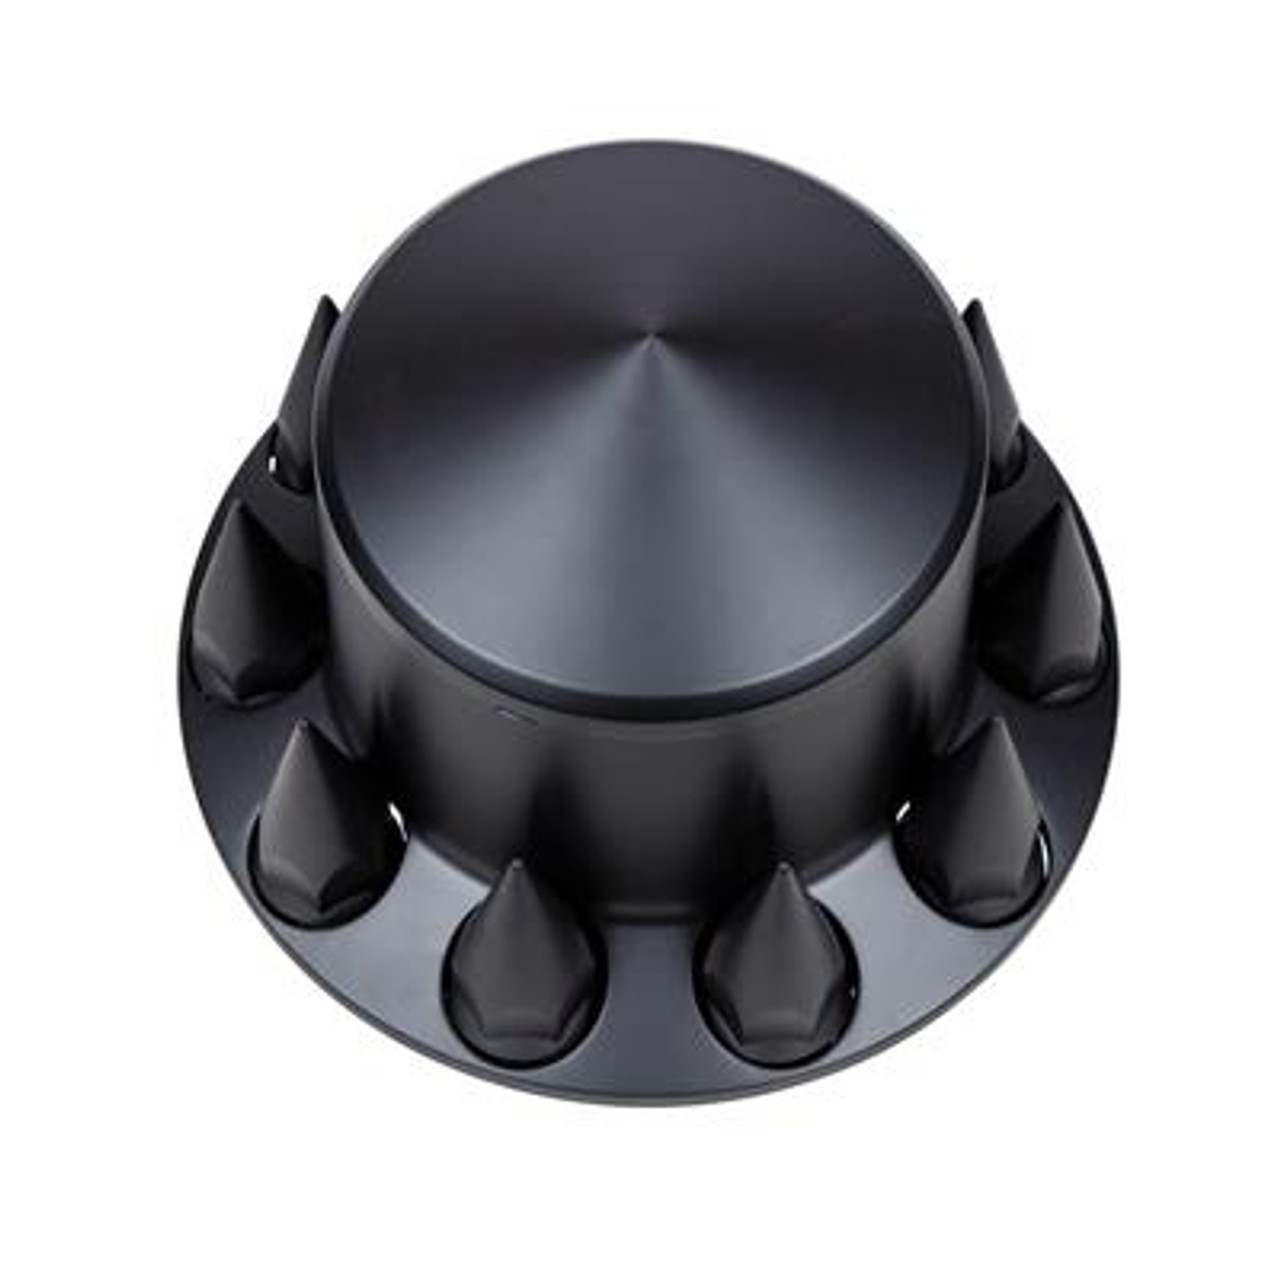 Pointed Rear Axle Cover With 33mm Spike Thread-On Nut Covers - Matte Black